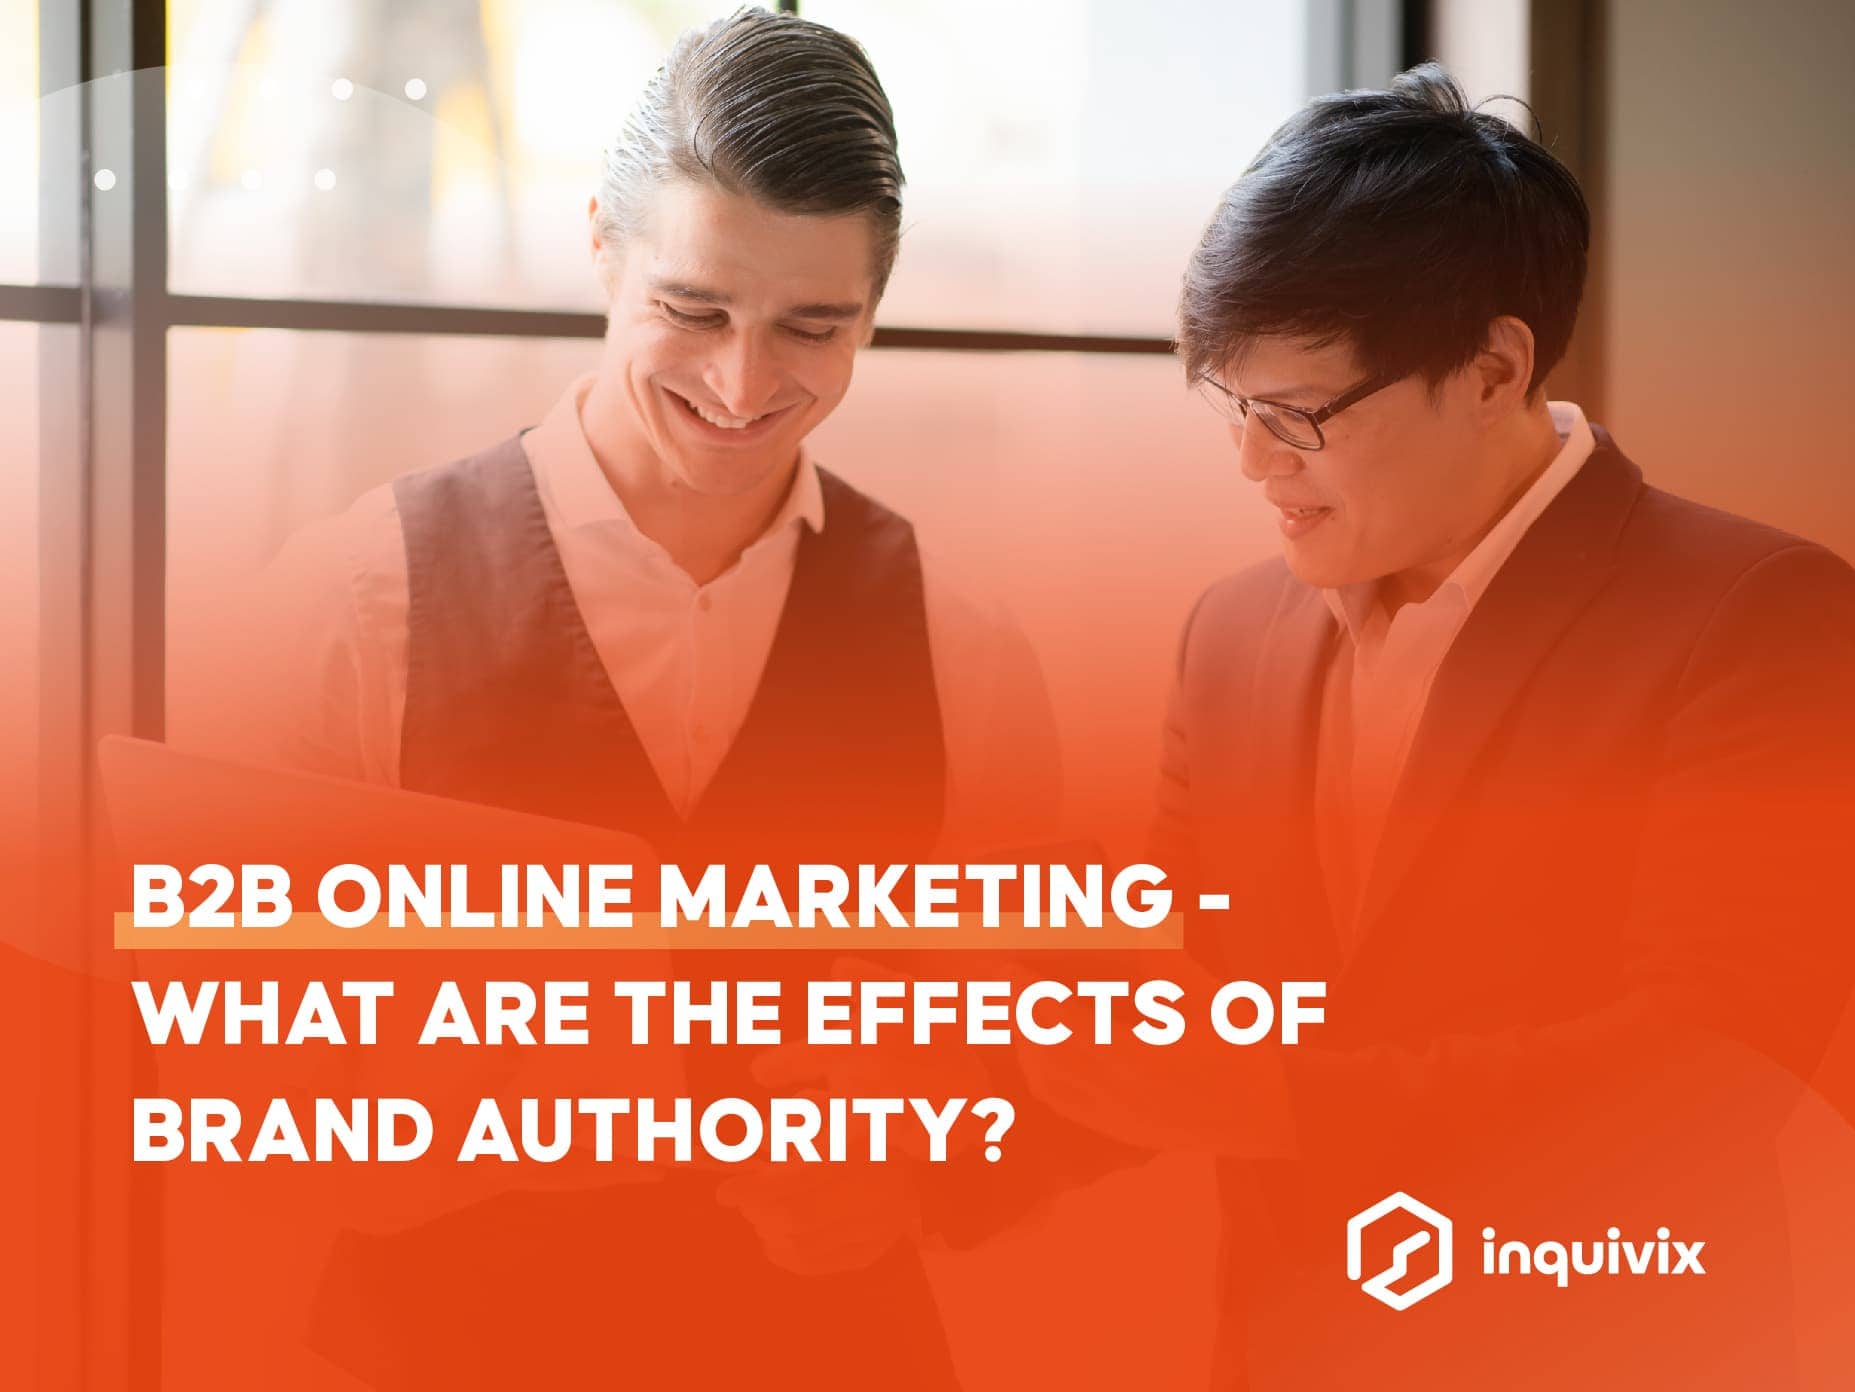 B2B ONLINE MARKETING - WHAT ARE THE EFFECTS OF BRAND AUTHORITY